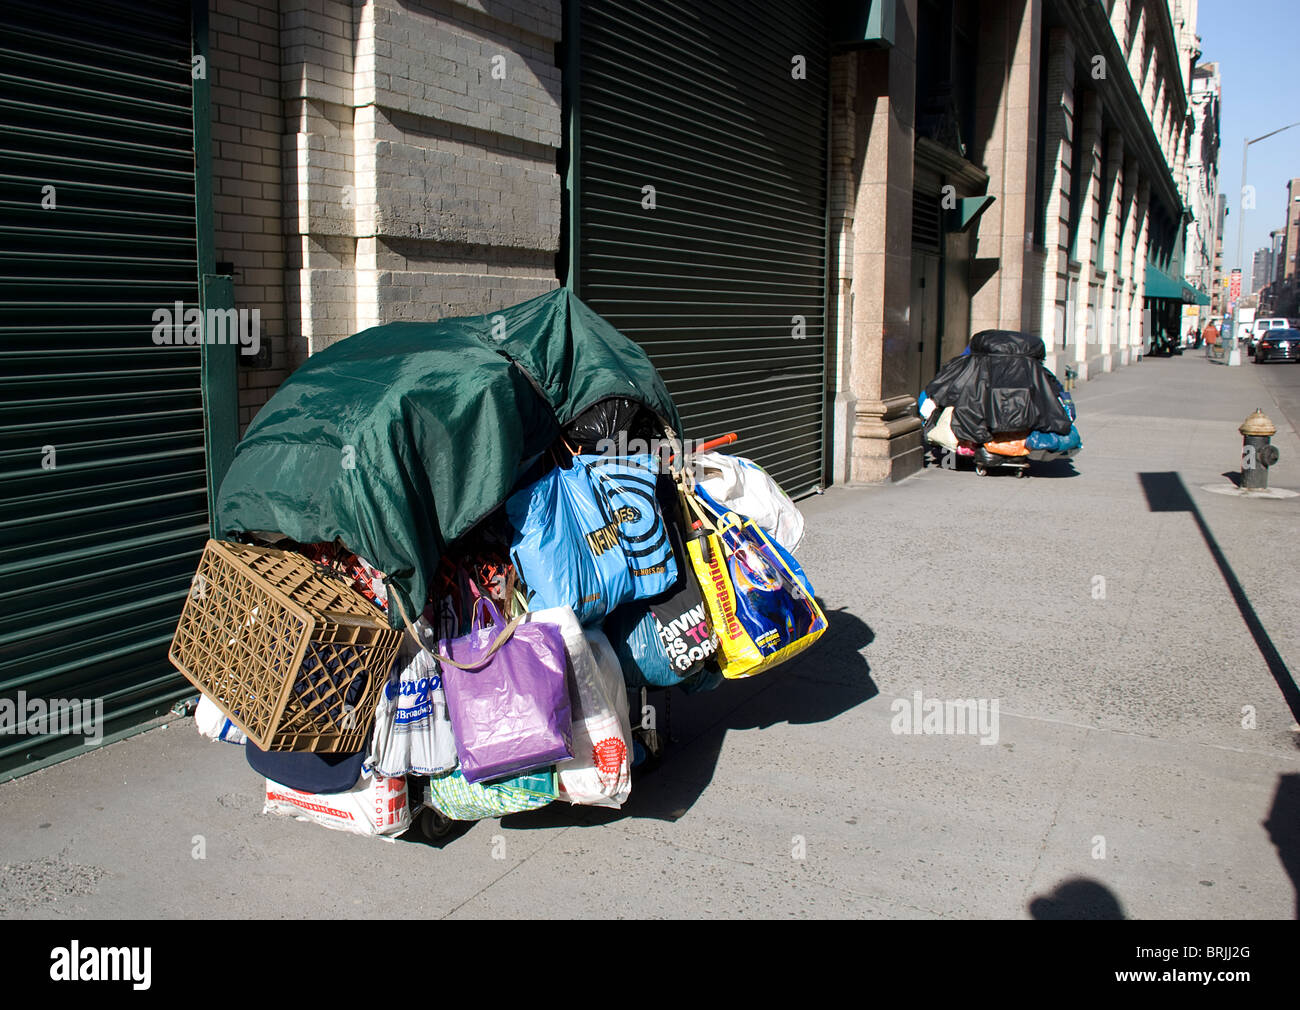 Shopping carts full of possessions belonging to street dweller Stock Photo